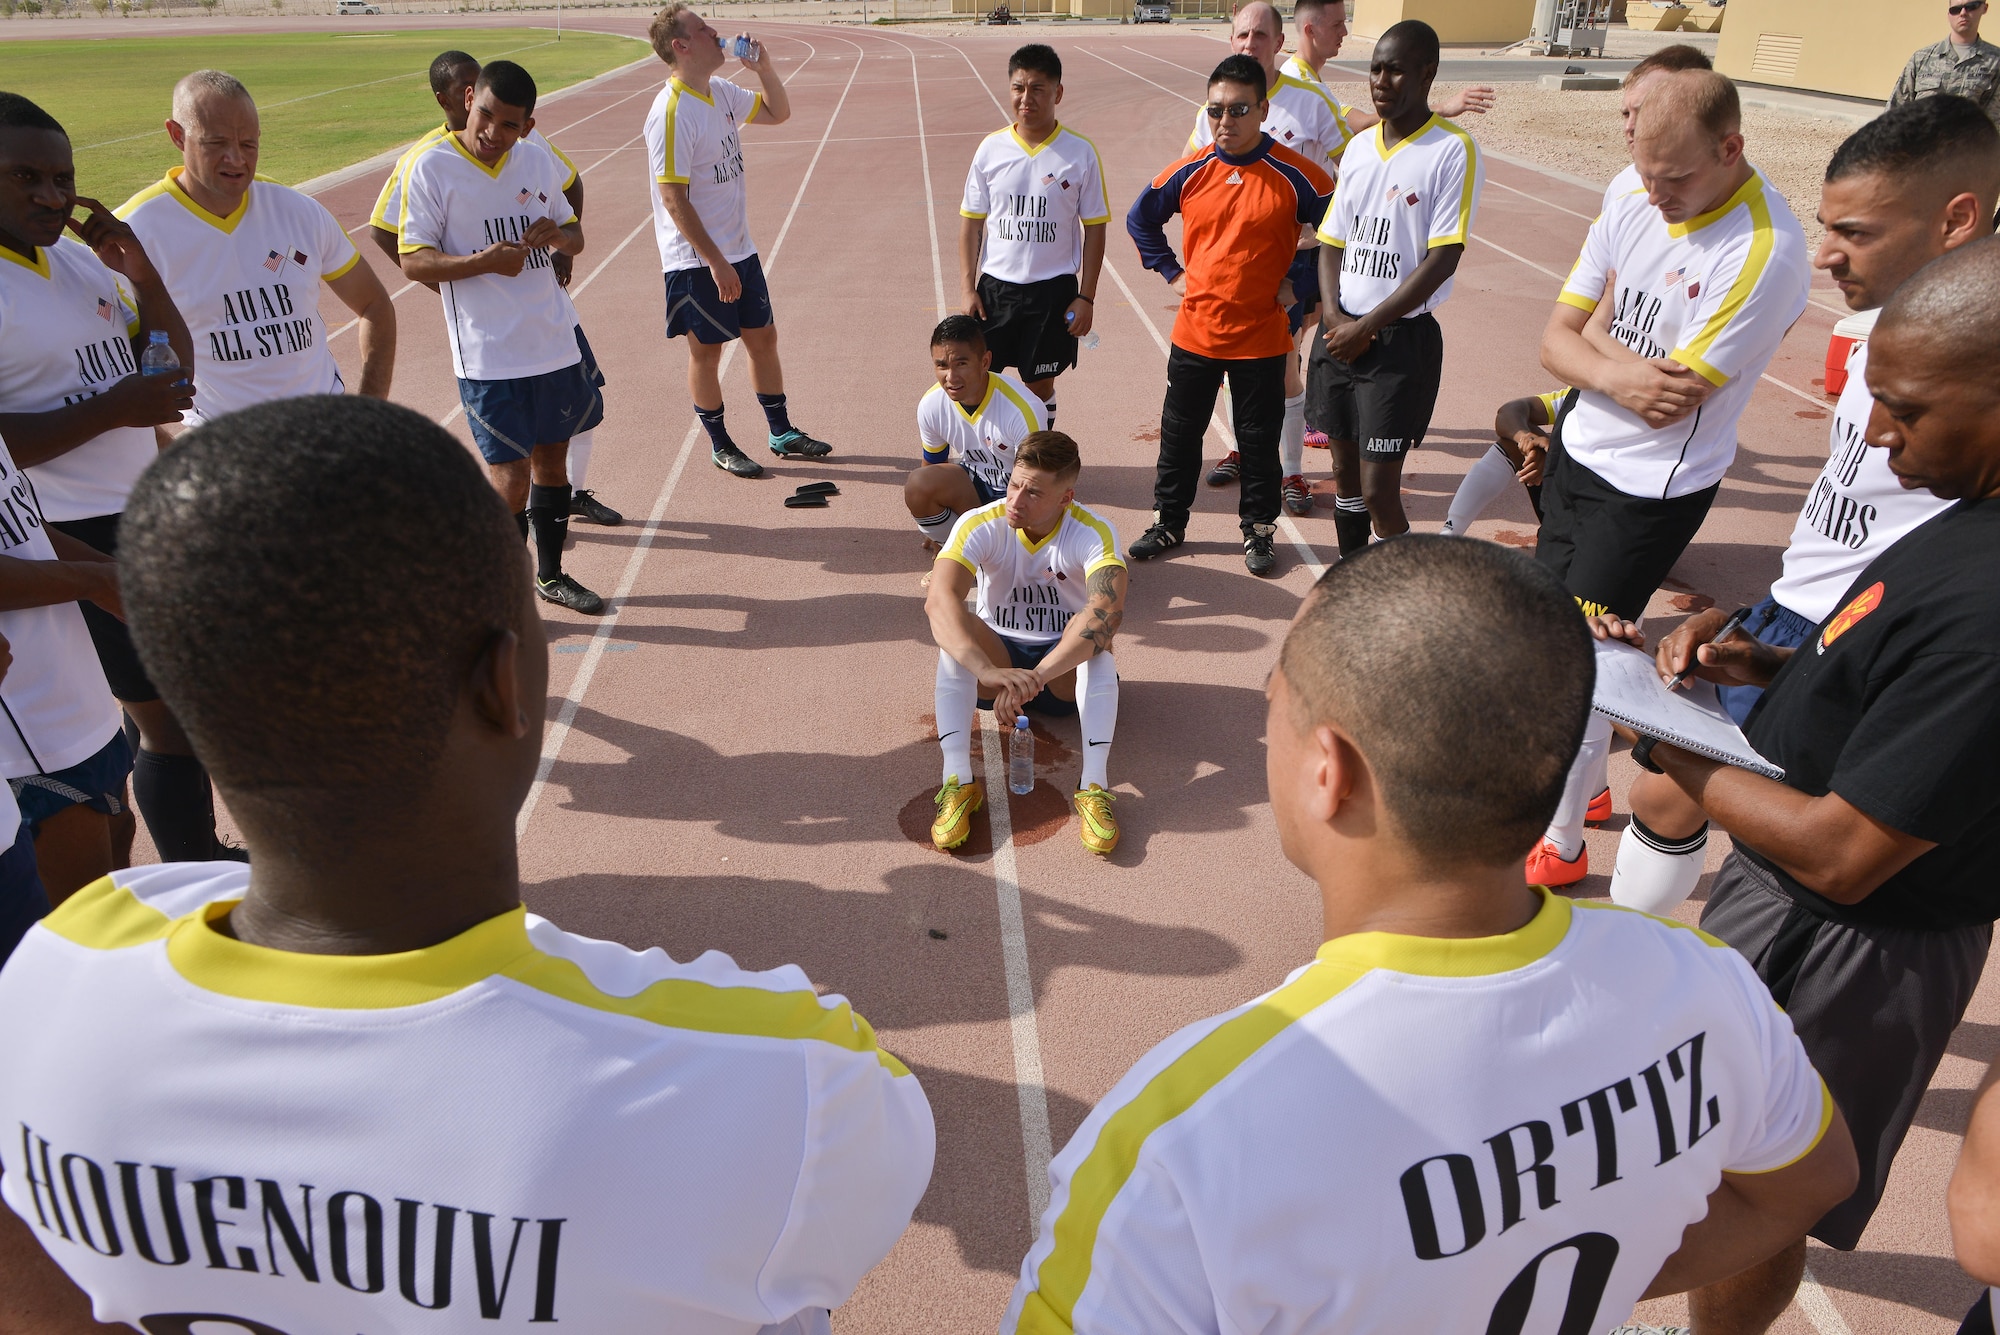 Members of the Al Udeid All-Stars go over a game plan at half-time during a soccer match against Qatari military members in celebration of the 240th U.S.  Army birthday June 14, 2015 at Al Udeid Air Base, Qatar. AUAB All-Stars planned a soccer match to help strengthen the partnership between the U.S. and Qatari military and build friendships between service members. (U.S. Air Force photo/Staff Sgt. Alexandre Montes)